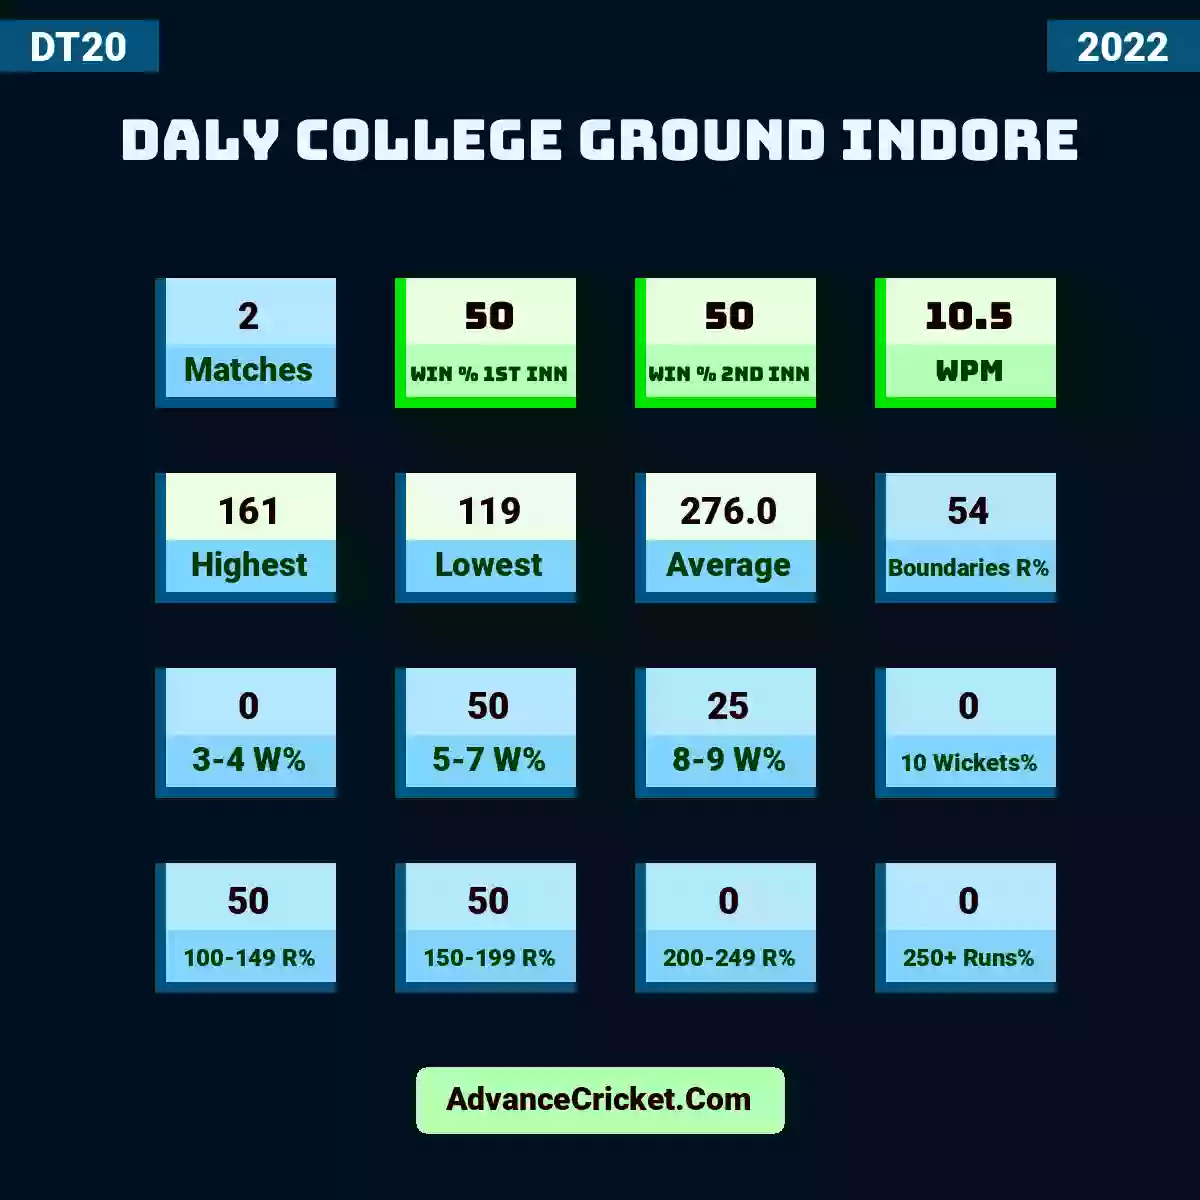 Image showing Daly College Ground Indore with Matches: 2, Win % 1st Inn: 50, Win % 2nd Inn: 50, WPM: 10.5, Highest: 161, Lowest: 119, Average: 276.0, Boundaries R%: 54, 3-4 W%: 0, 5-7 W%: 50, 8-9 W%: 25, 10 Wickets%: 0, 100-149 R%: 50, 150-199 R%: 50, 200-249 R%: 0, 250+ Runs%: 0.